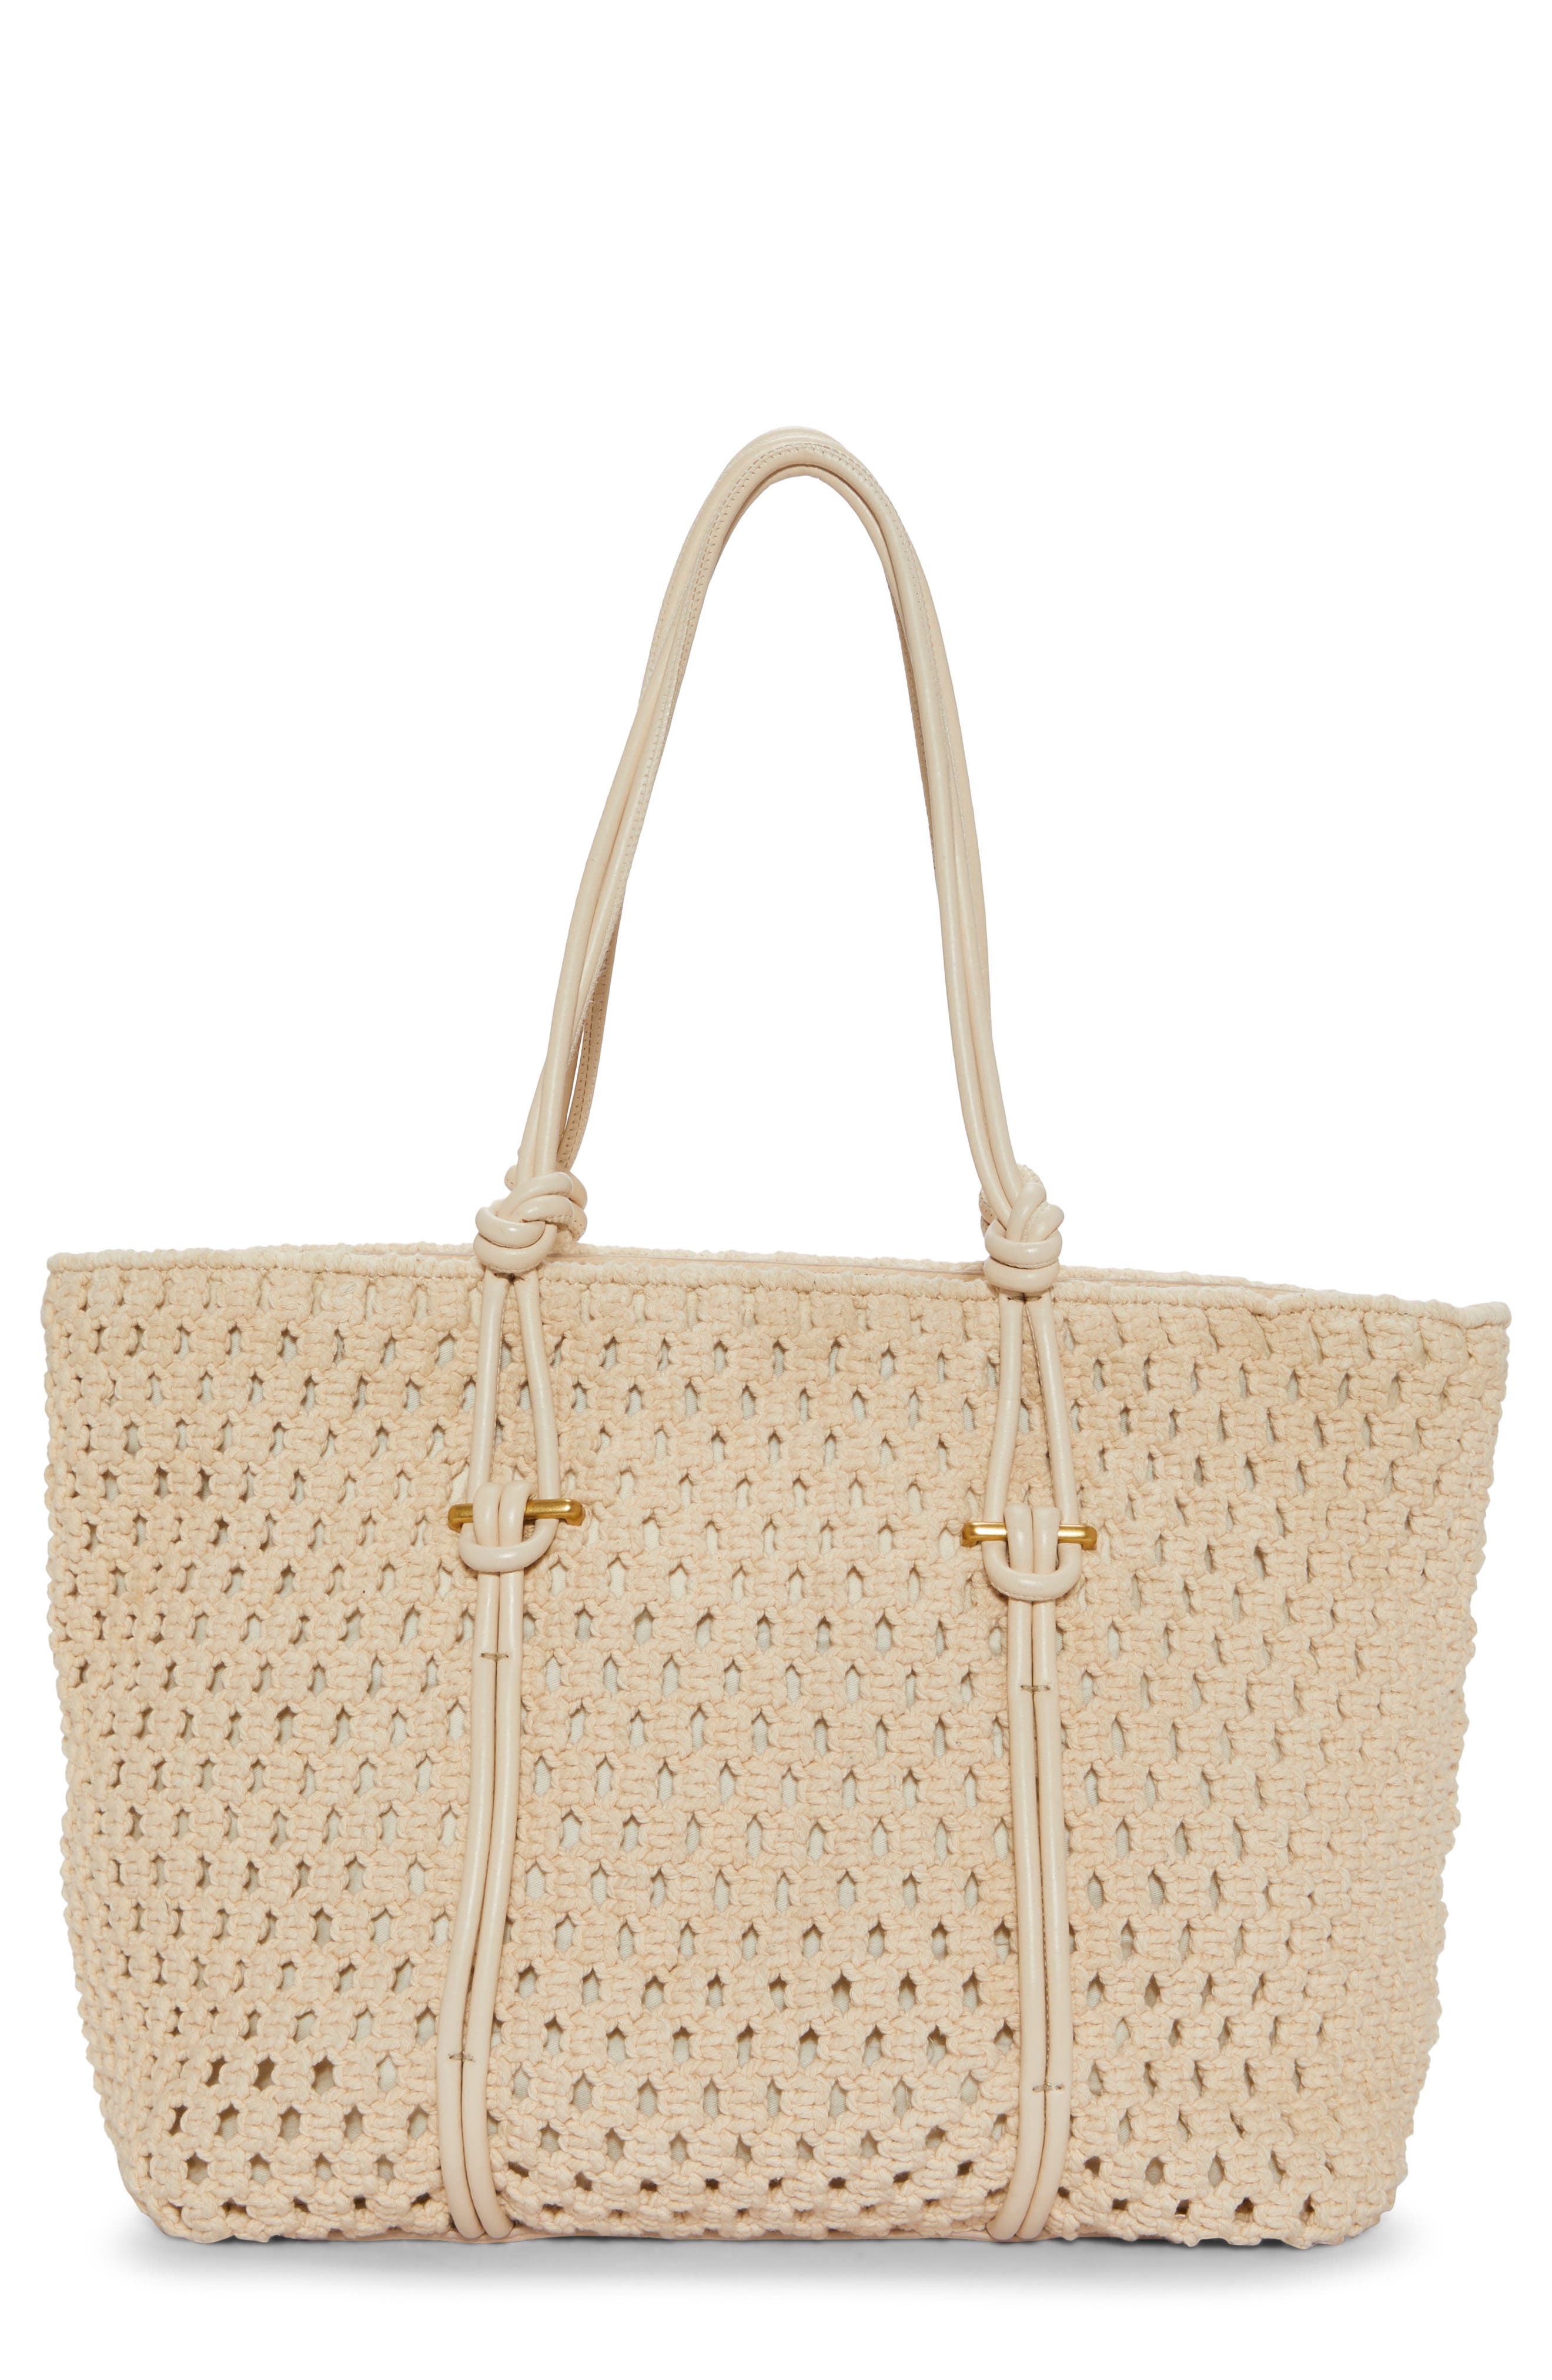 Vince Camuto Arjay Tote, Cocoa Biscuit送料無料 :B0B9P3Z2Y8:Smart